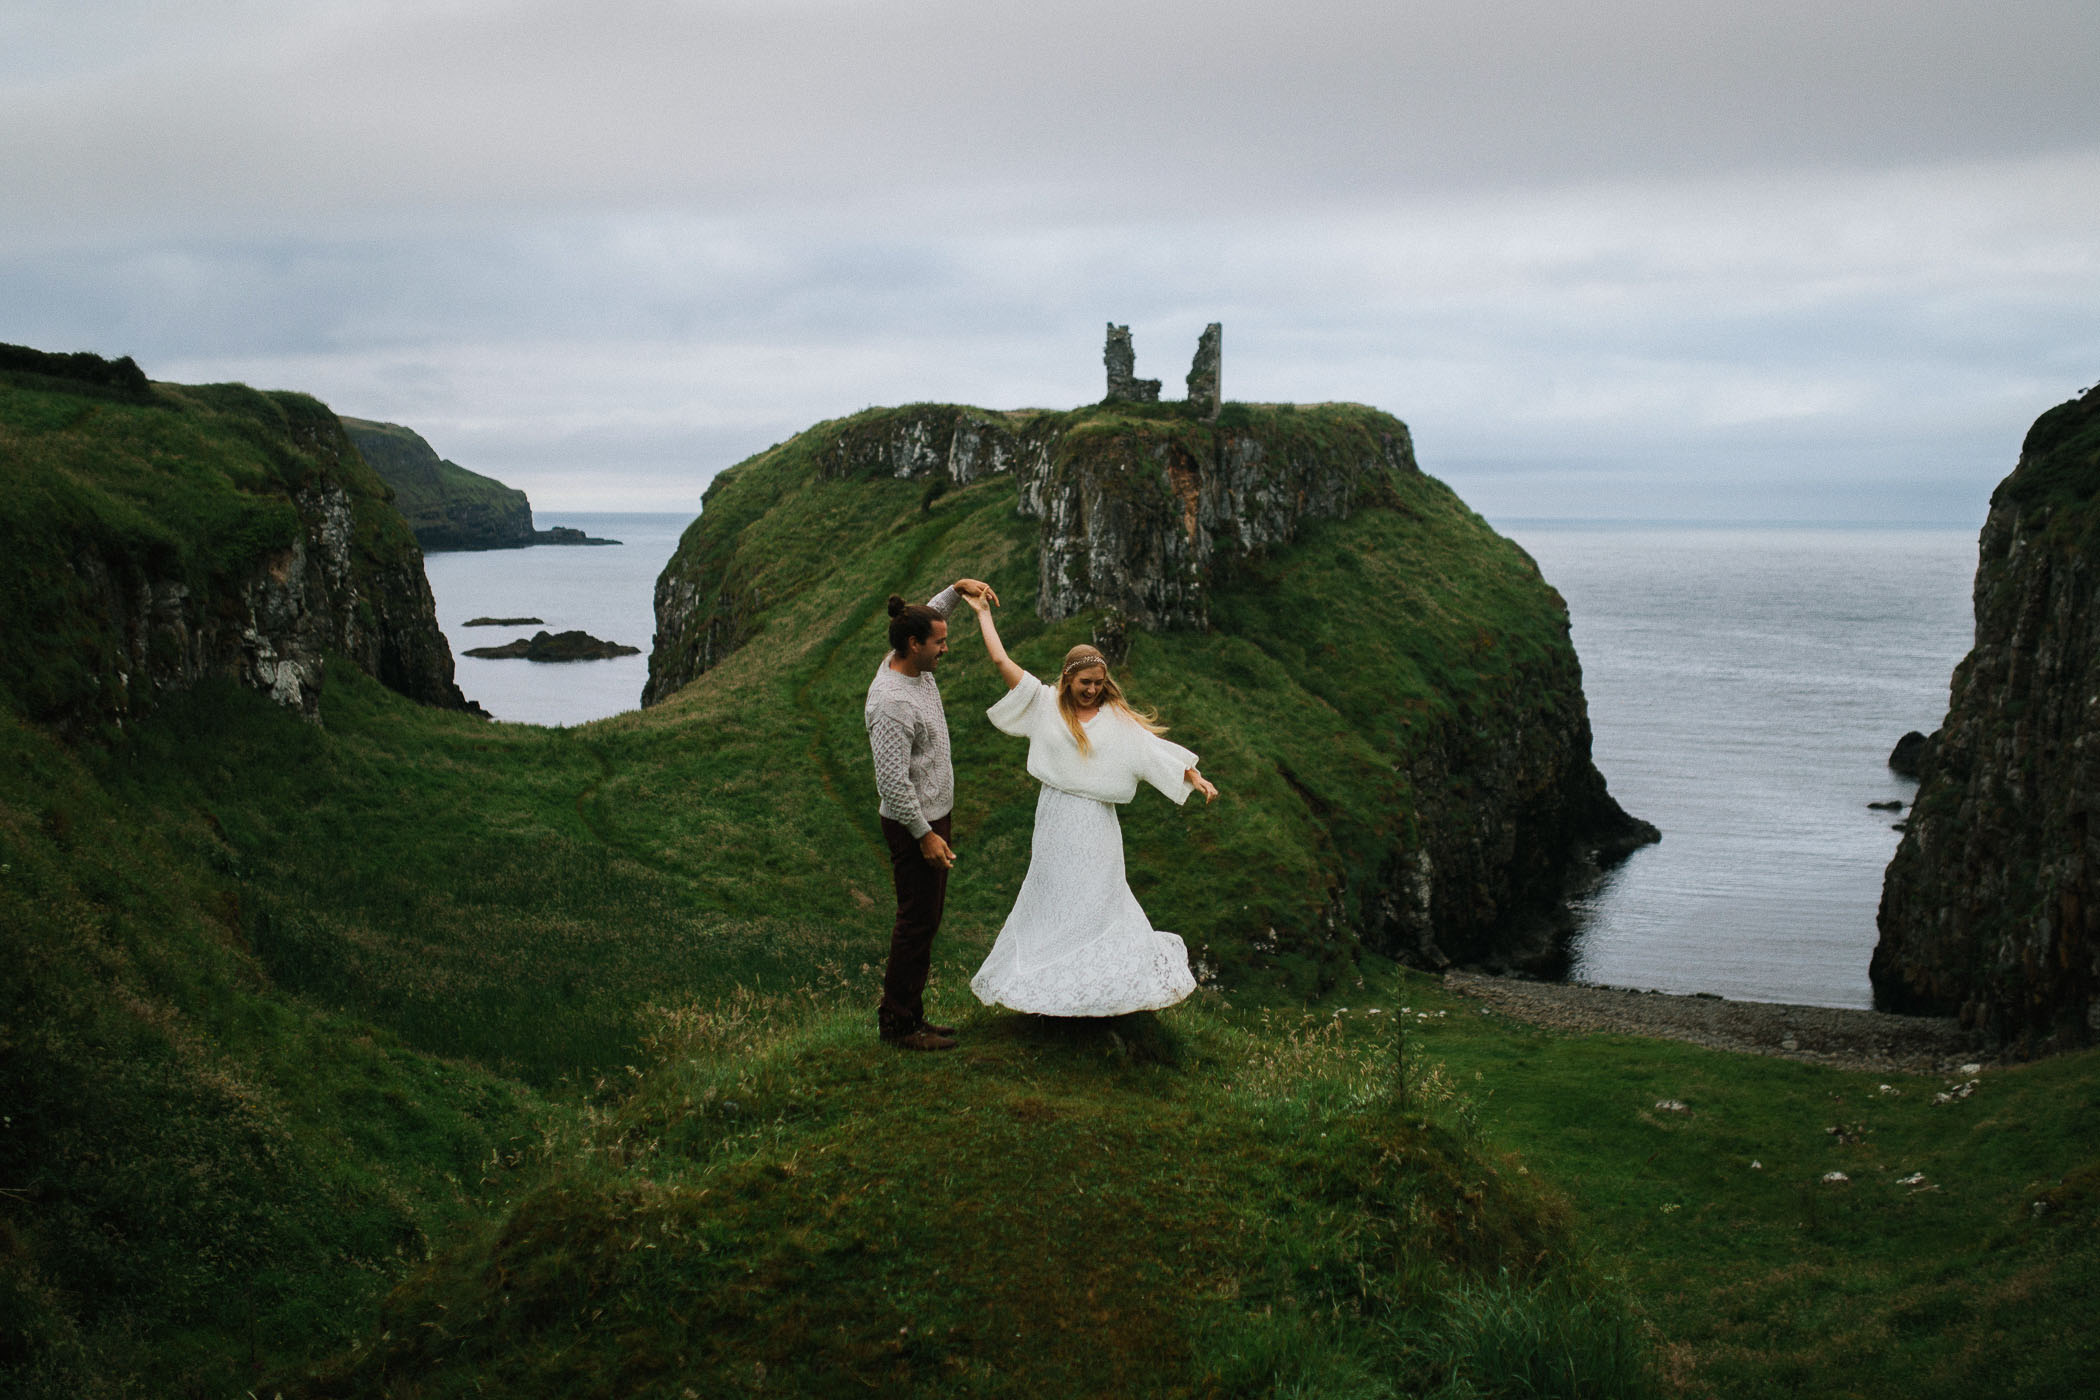 A couple dance on a grassy clifftop on the coast with the sea behind them. By Luke Flint Photography